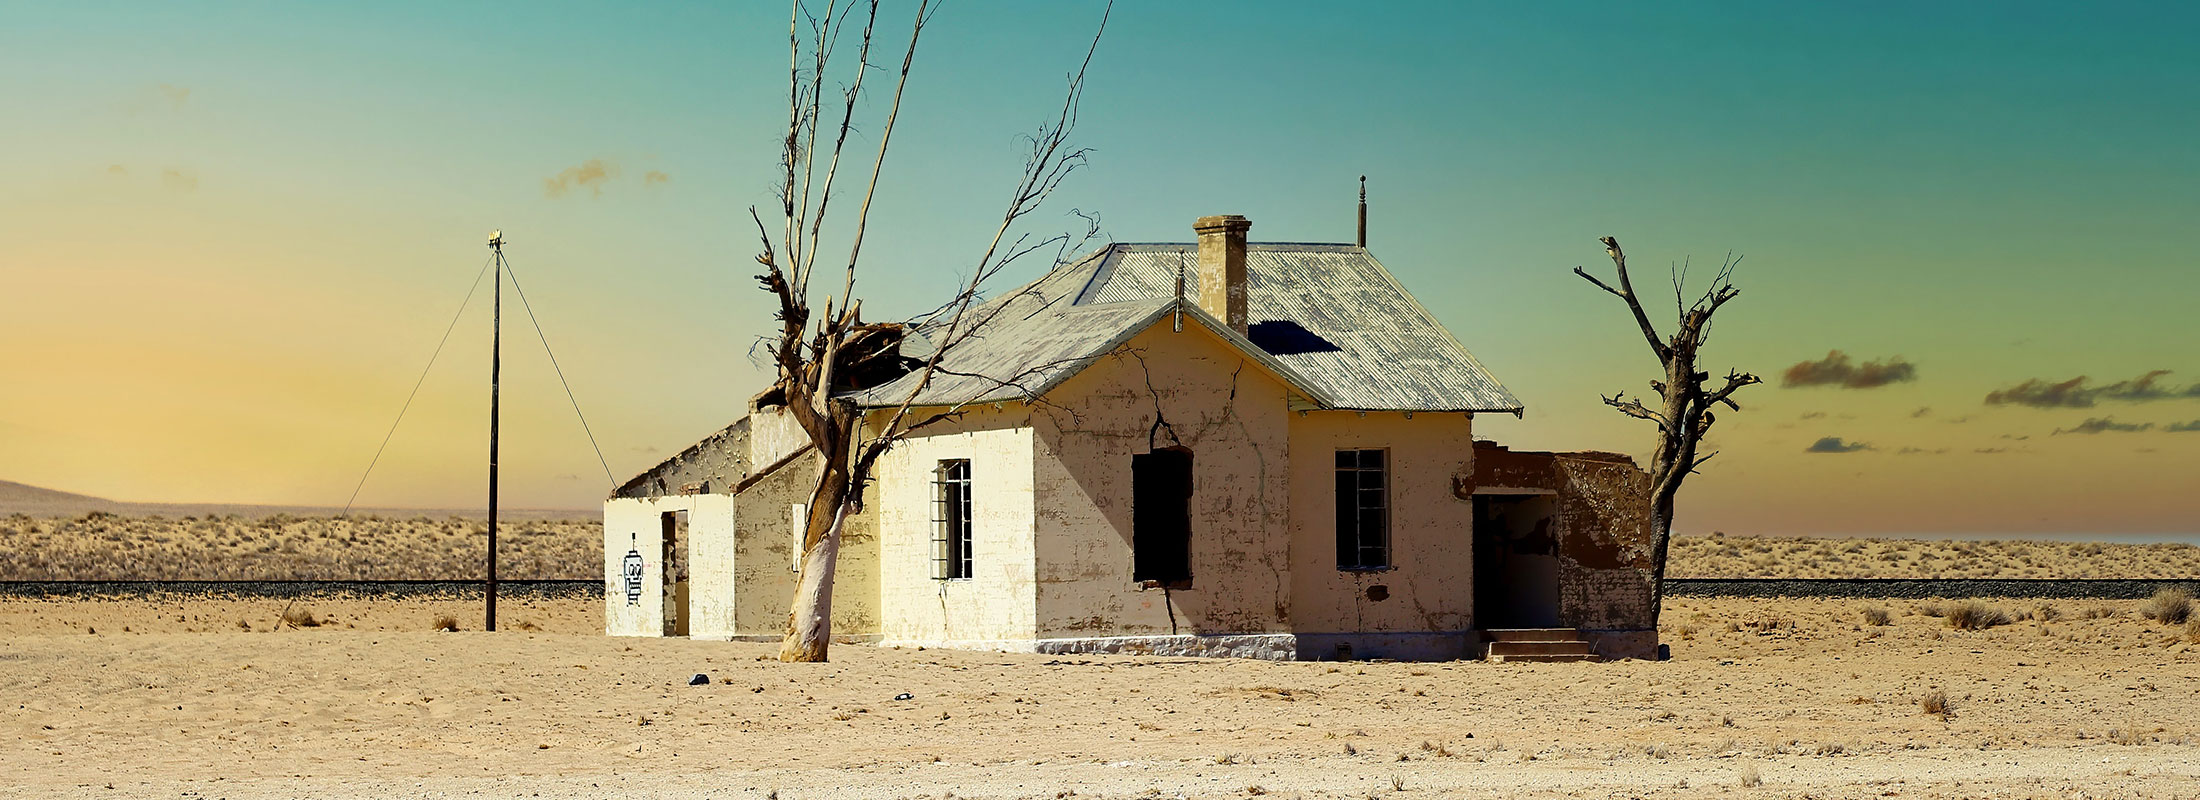 Dry landscape with house and dead tree photo Simon Hurry Unsplash